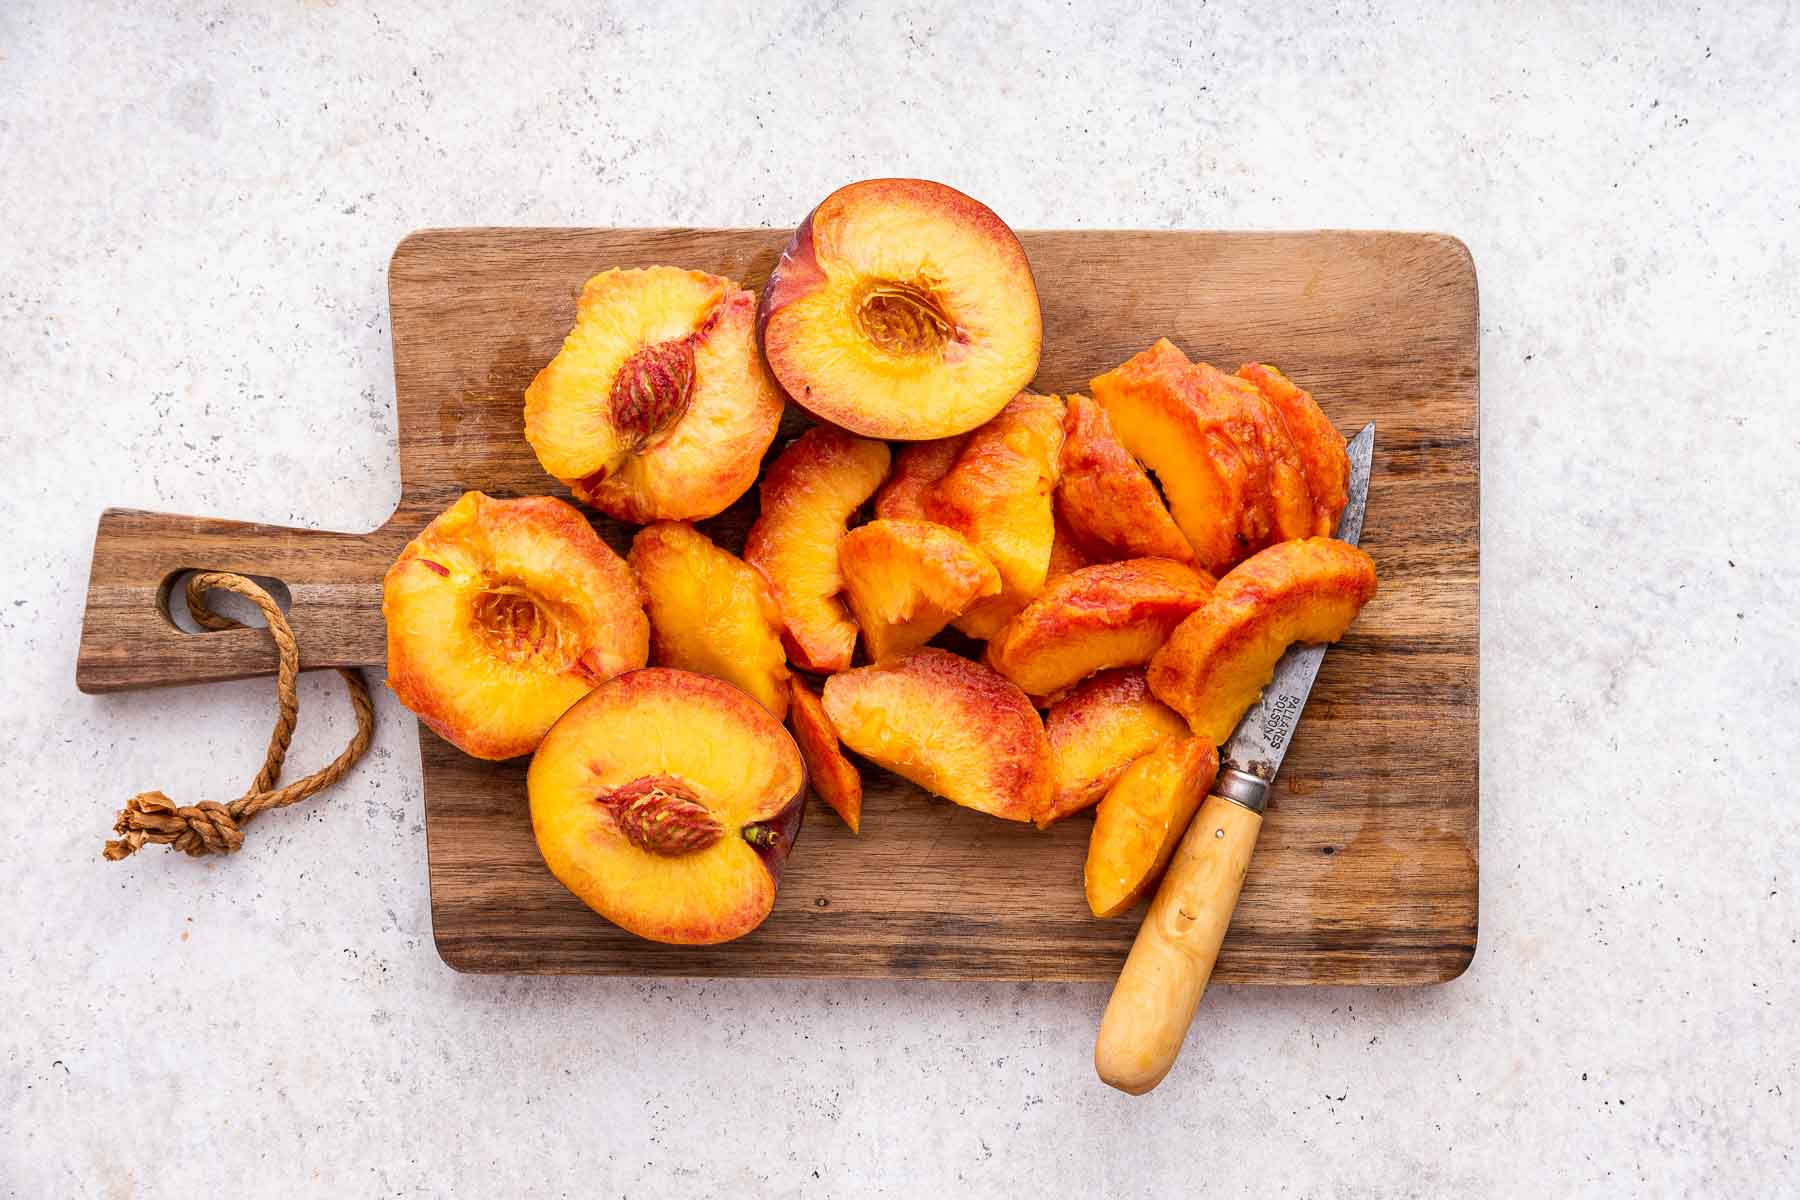 Fresh peaches being sliced on a wooden cutting board.